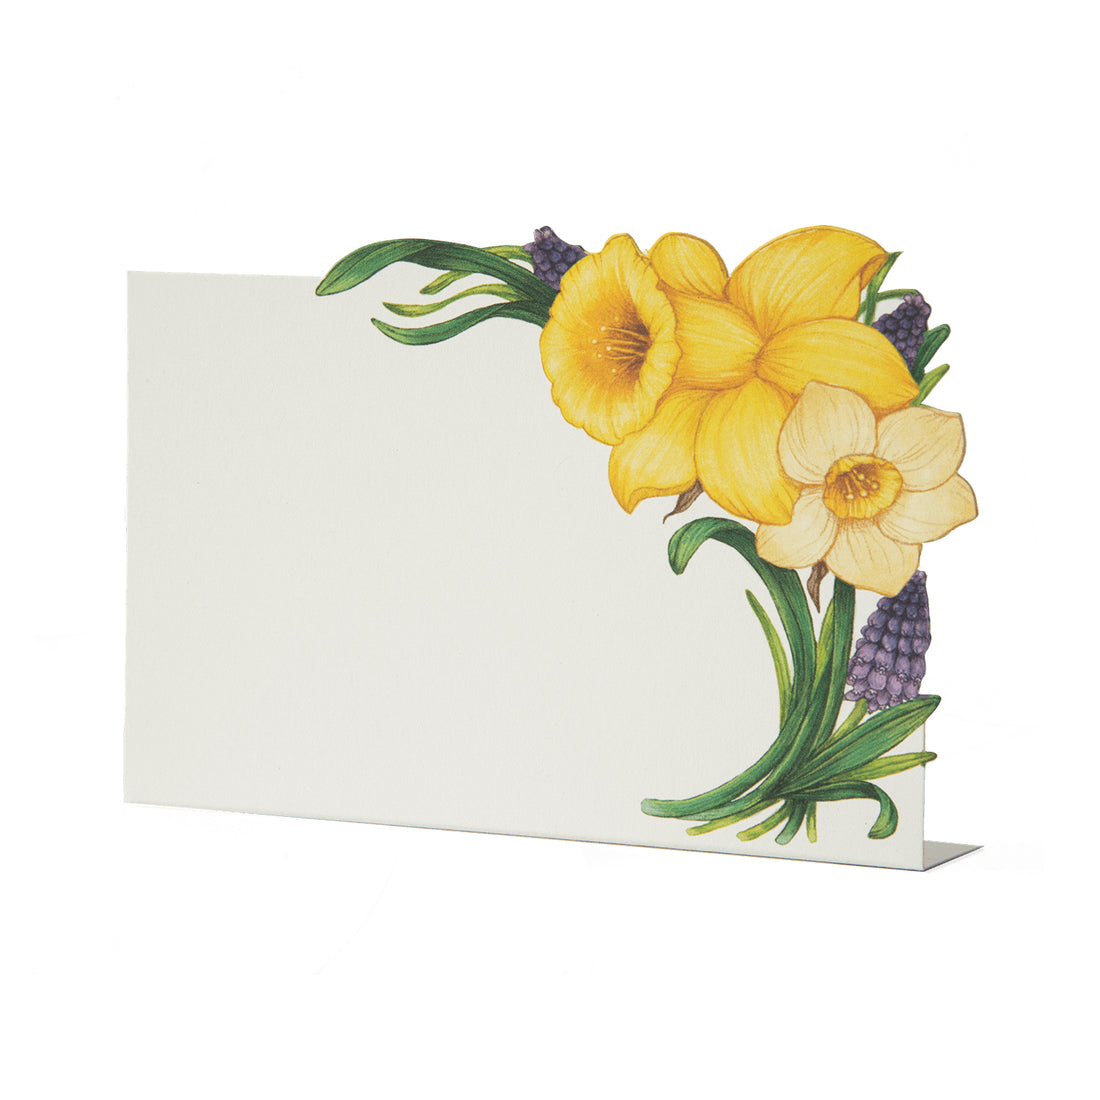 A white, rectangular freestanding place card featuring two vibrant yellow daffodils and purple blooms with green stems adorning the right edge of the card.